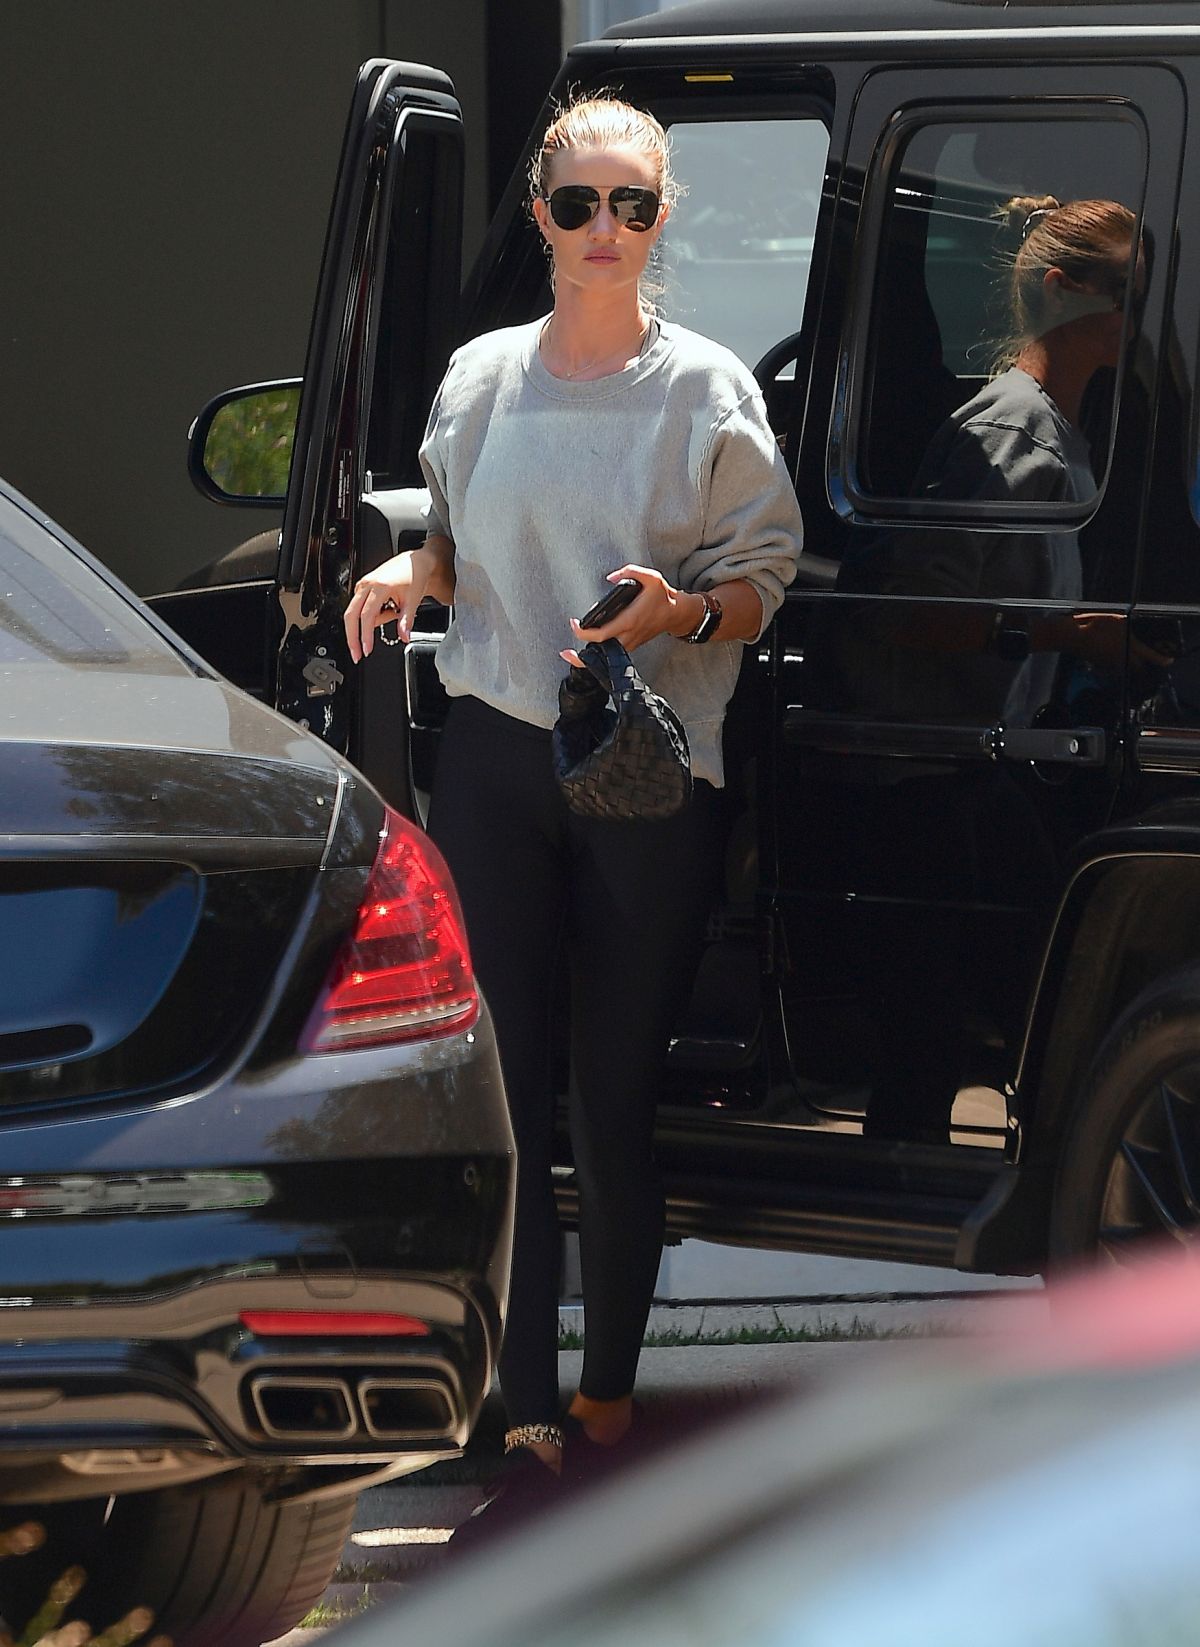 rosie-huntington-whiteley-arrives-at-a-gym-in-hollywood-07-20-2020-5.jpg